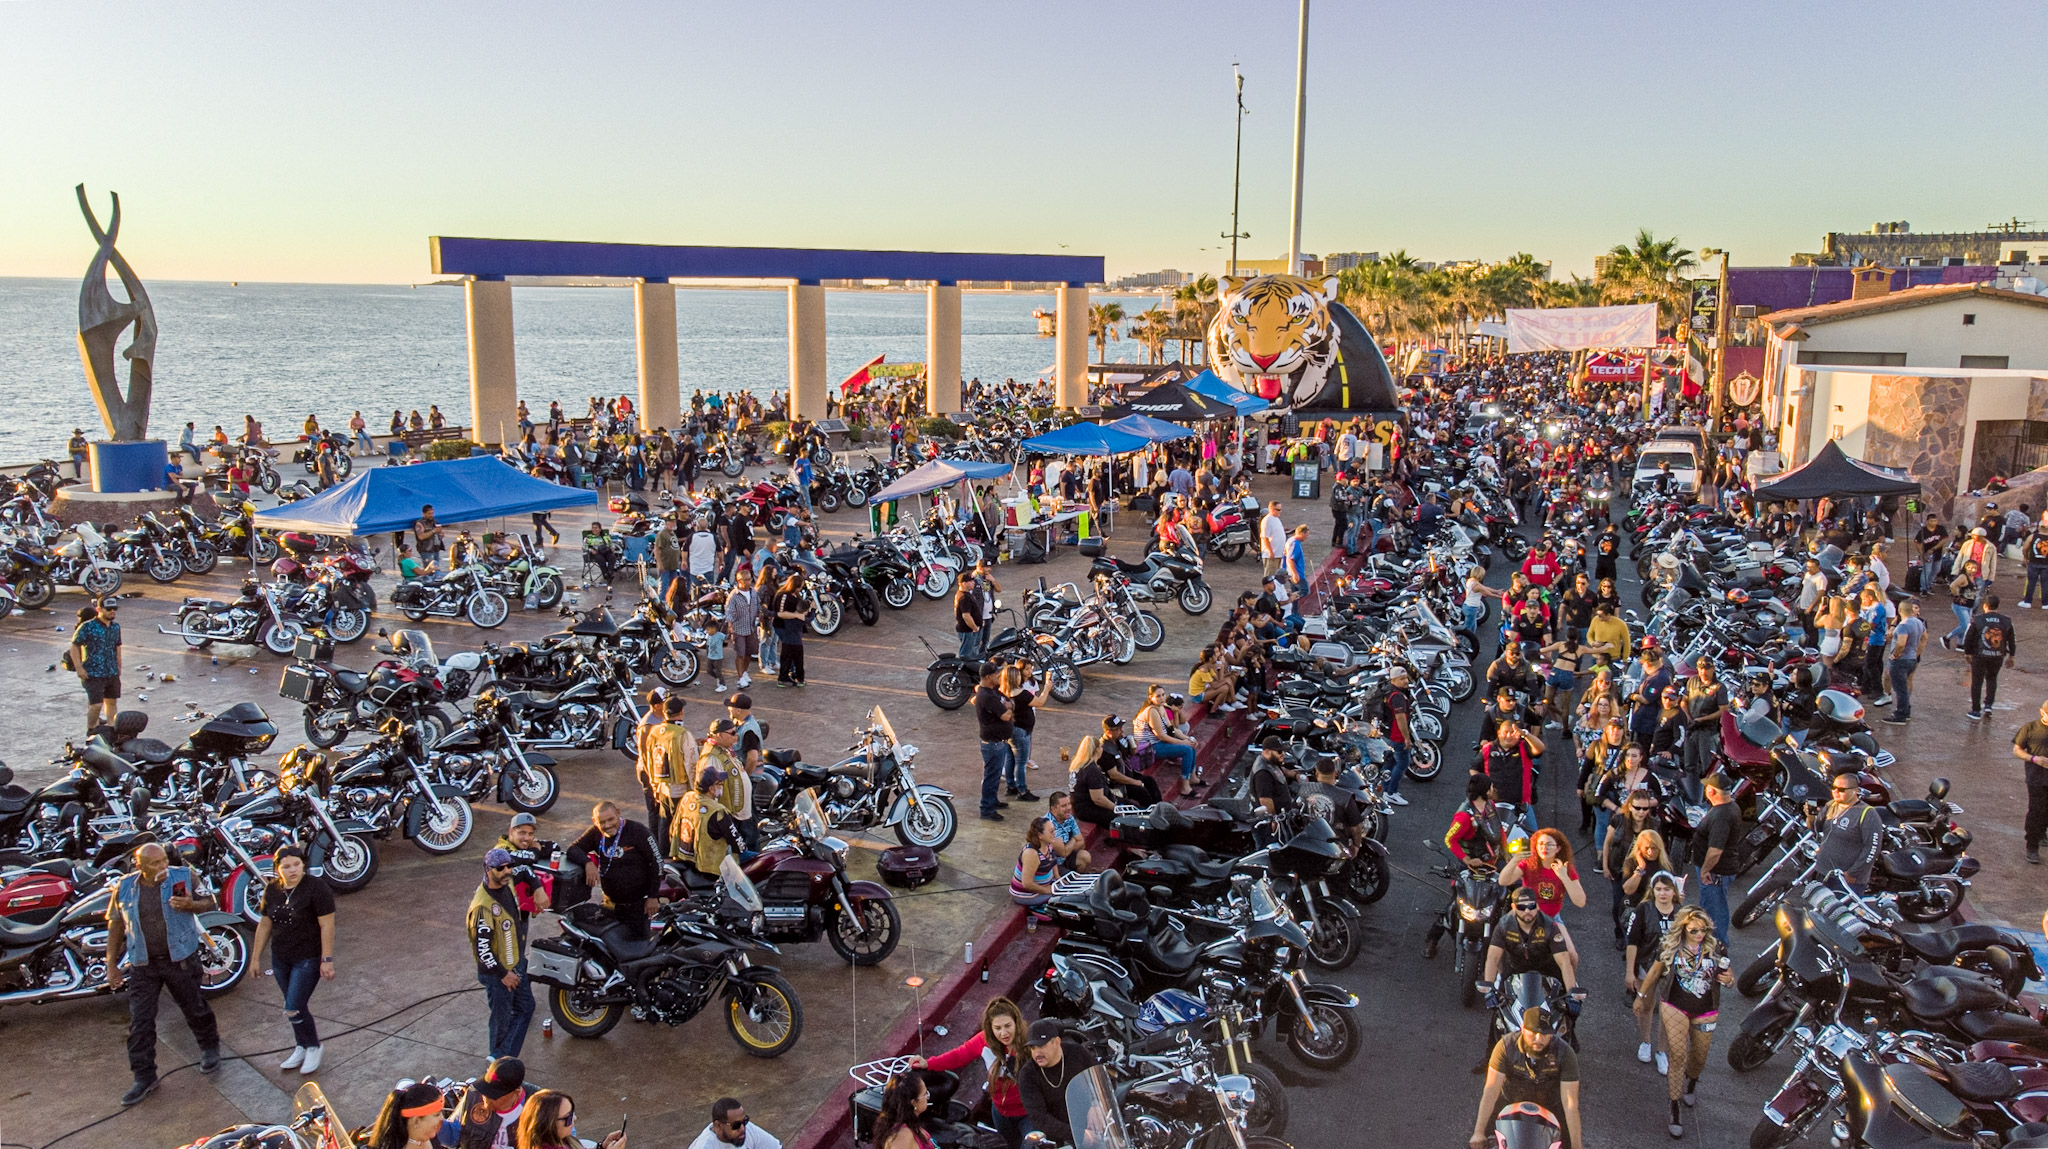 Motorcyclists enjoy the beach and fiesta time during the Rocky Point Rally in Puerto Penasco, Mexico